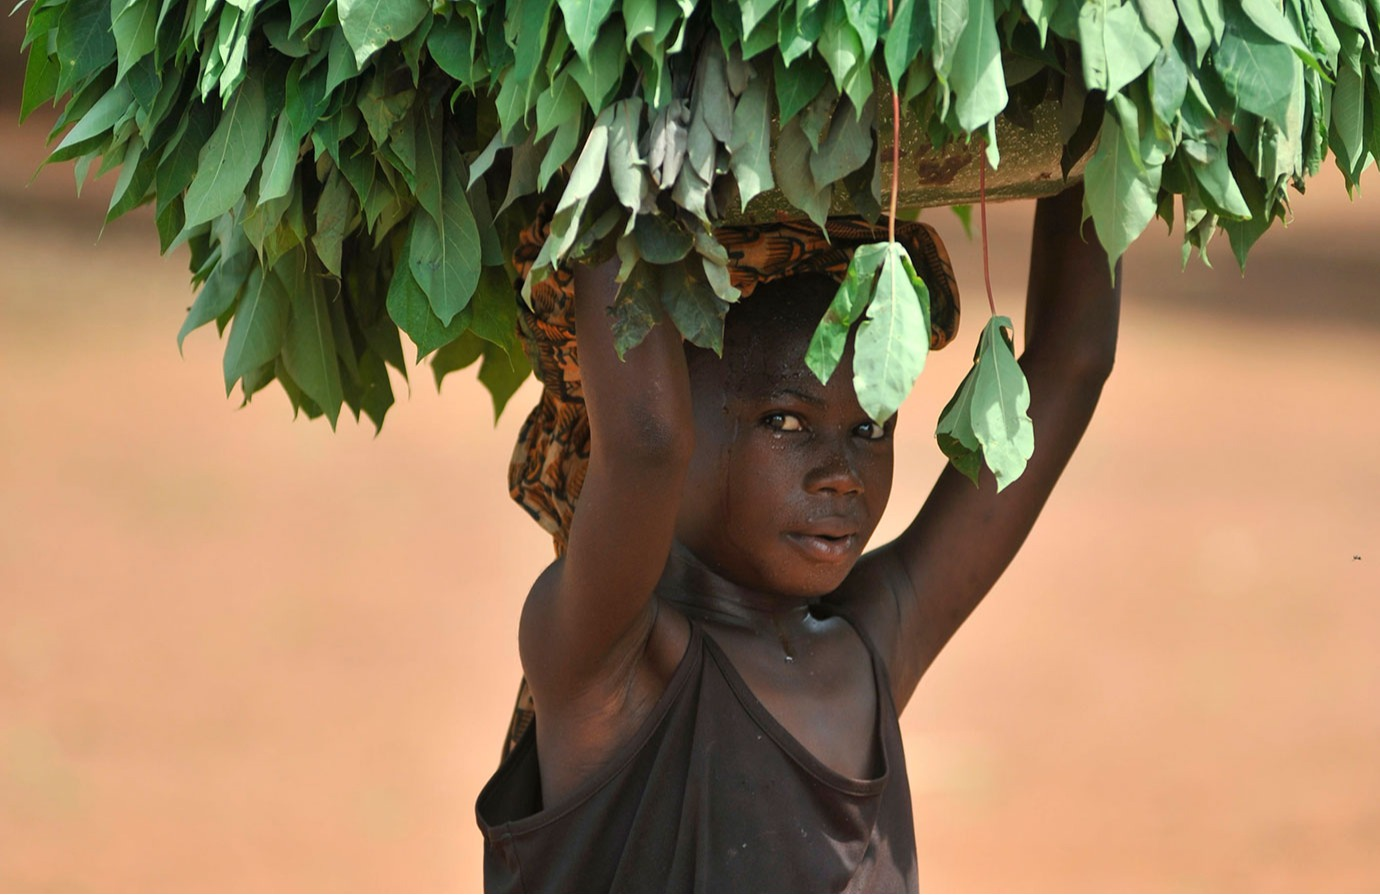 Engaging stakeholders to end child labour in agriculture